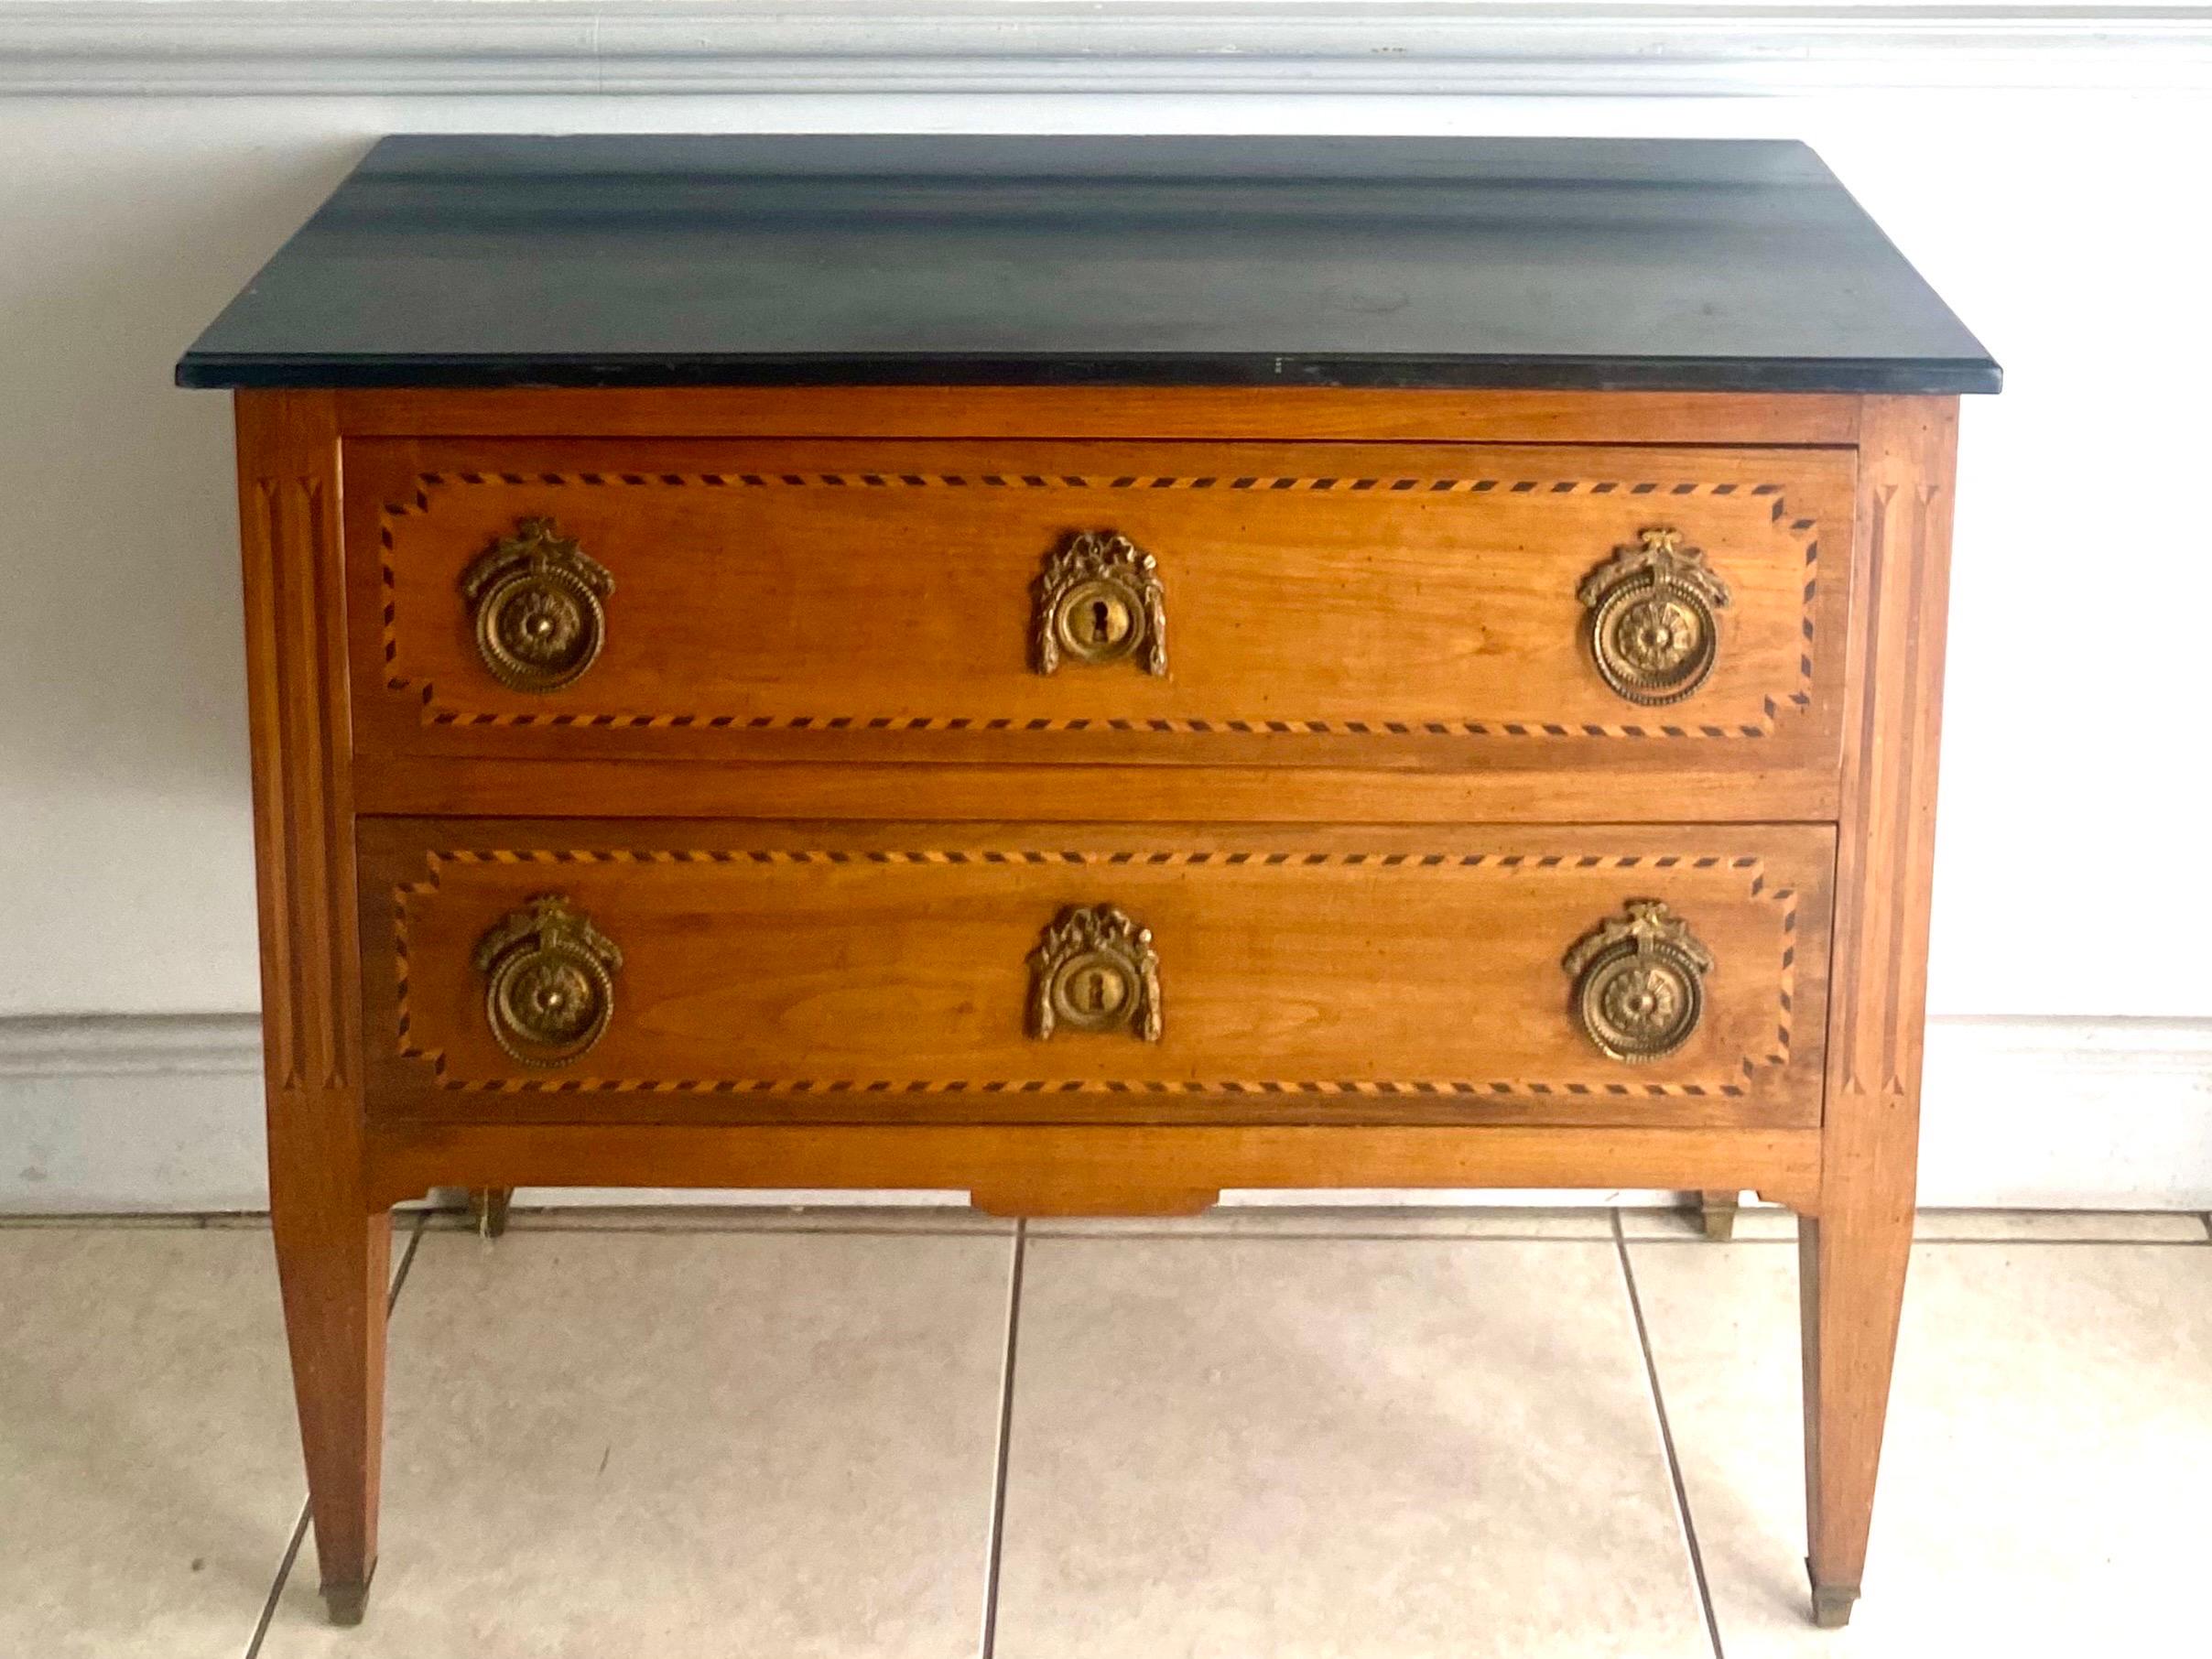 Wonderful French chest of drawers from the Louis XVI period, 18th century, with a rectangular black marble top surmounting two drawers, each with two ring handles, resting on square conical legs with bronze shoes.
Its facade is straight.

This